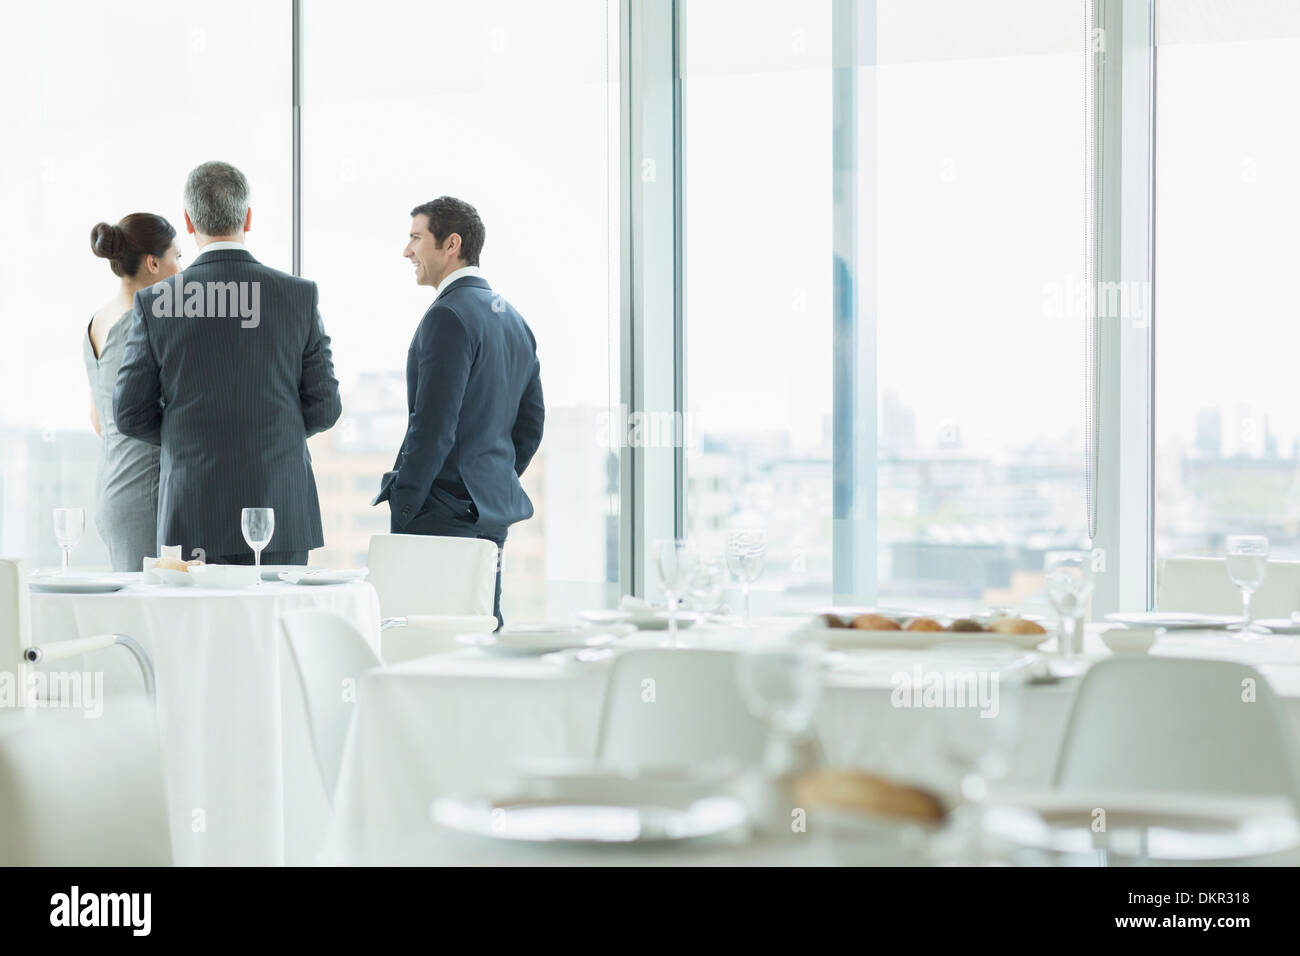 Business people talking in restaurant Stock Photo